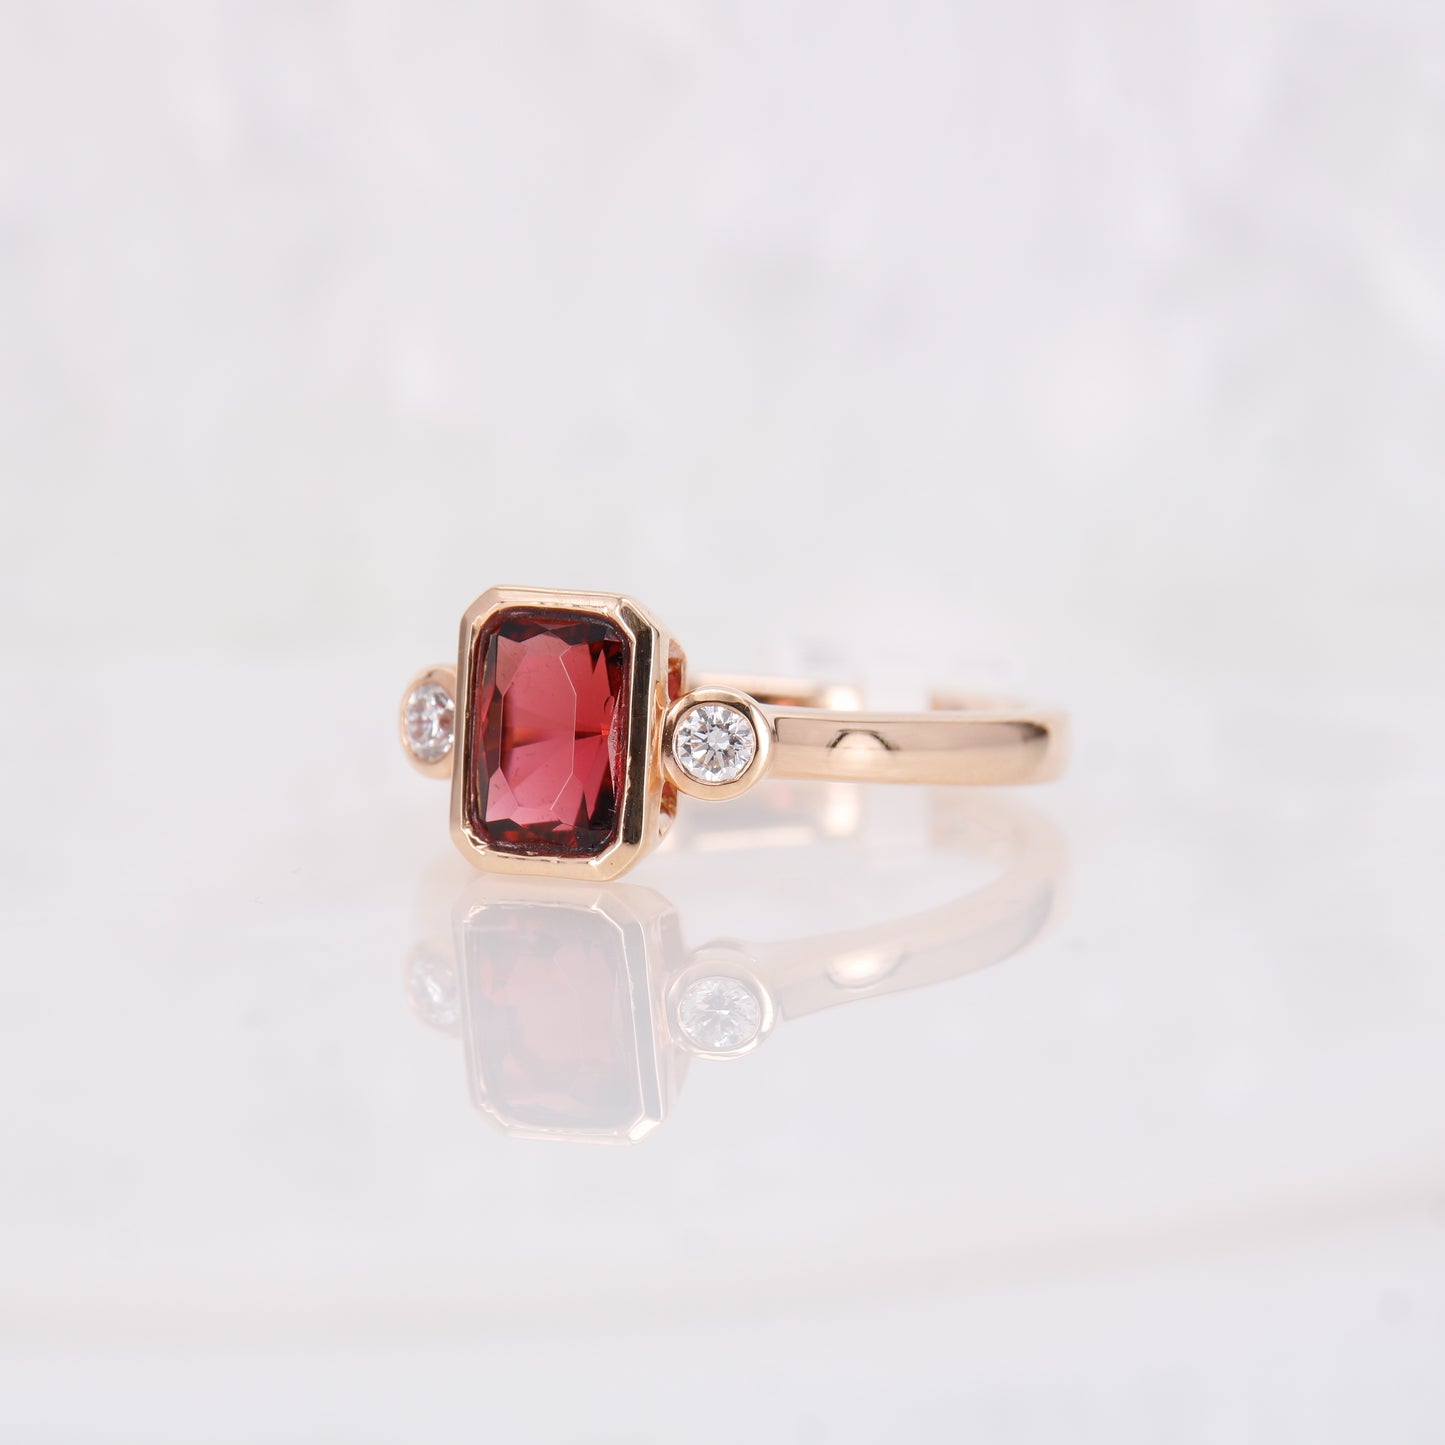 Rubellite and Diamond Ring. Crafted in luxurious 18ct rose gold, this ring features a central radiant rubellite, complemented by two sparkling round brilliant cut diamonds.